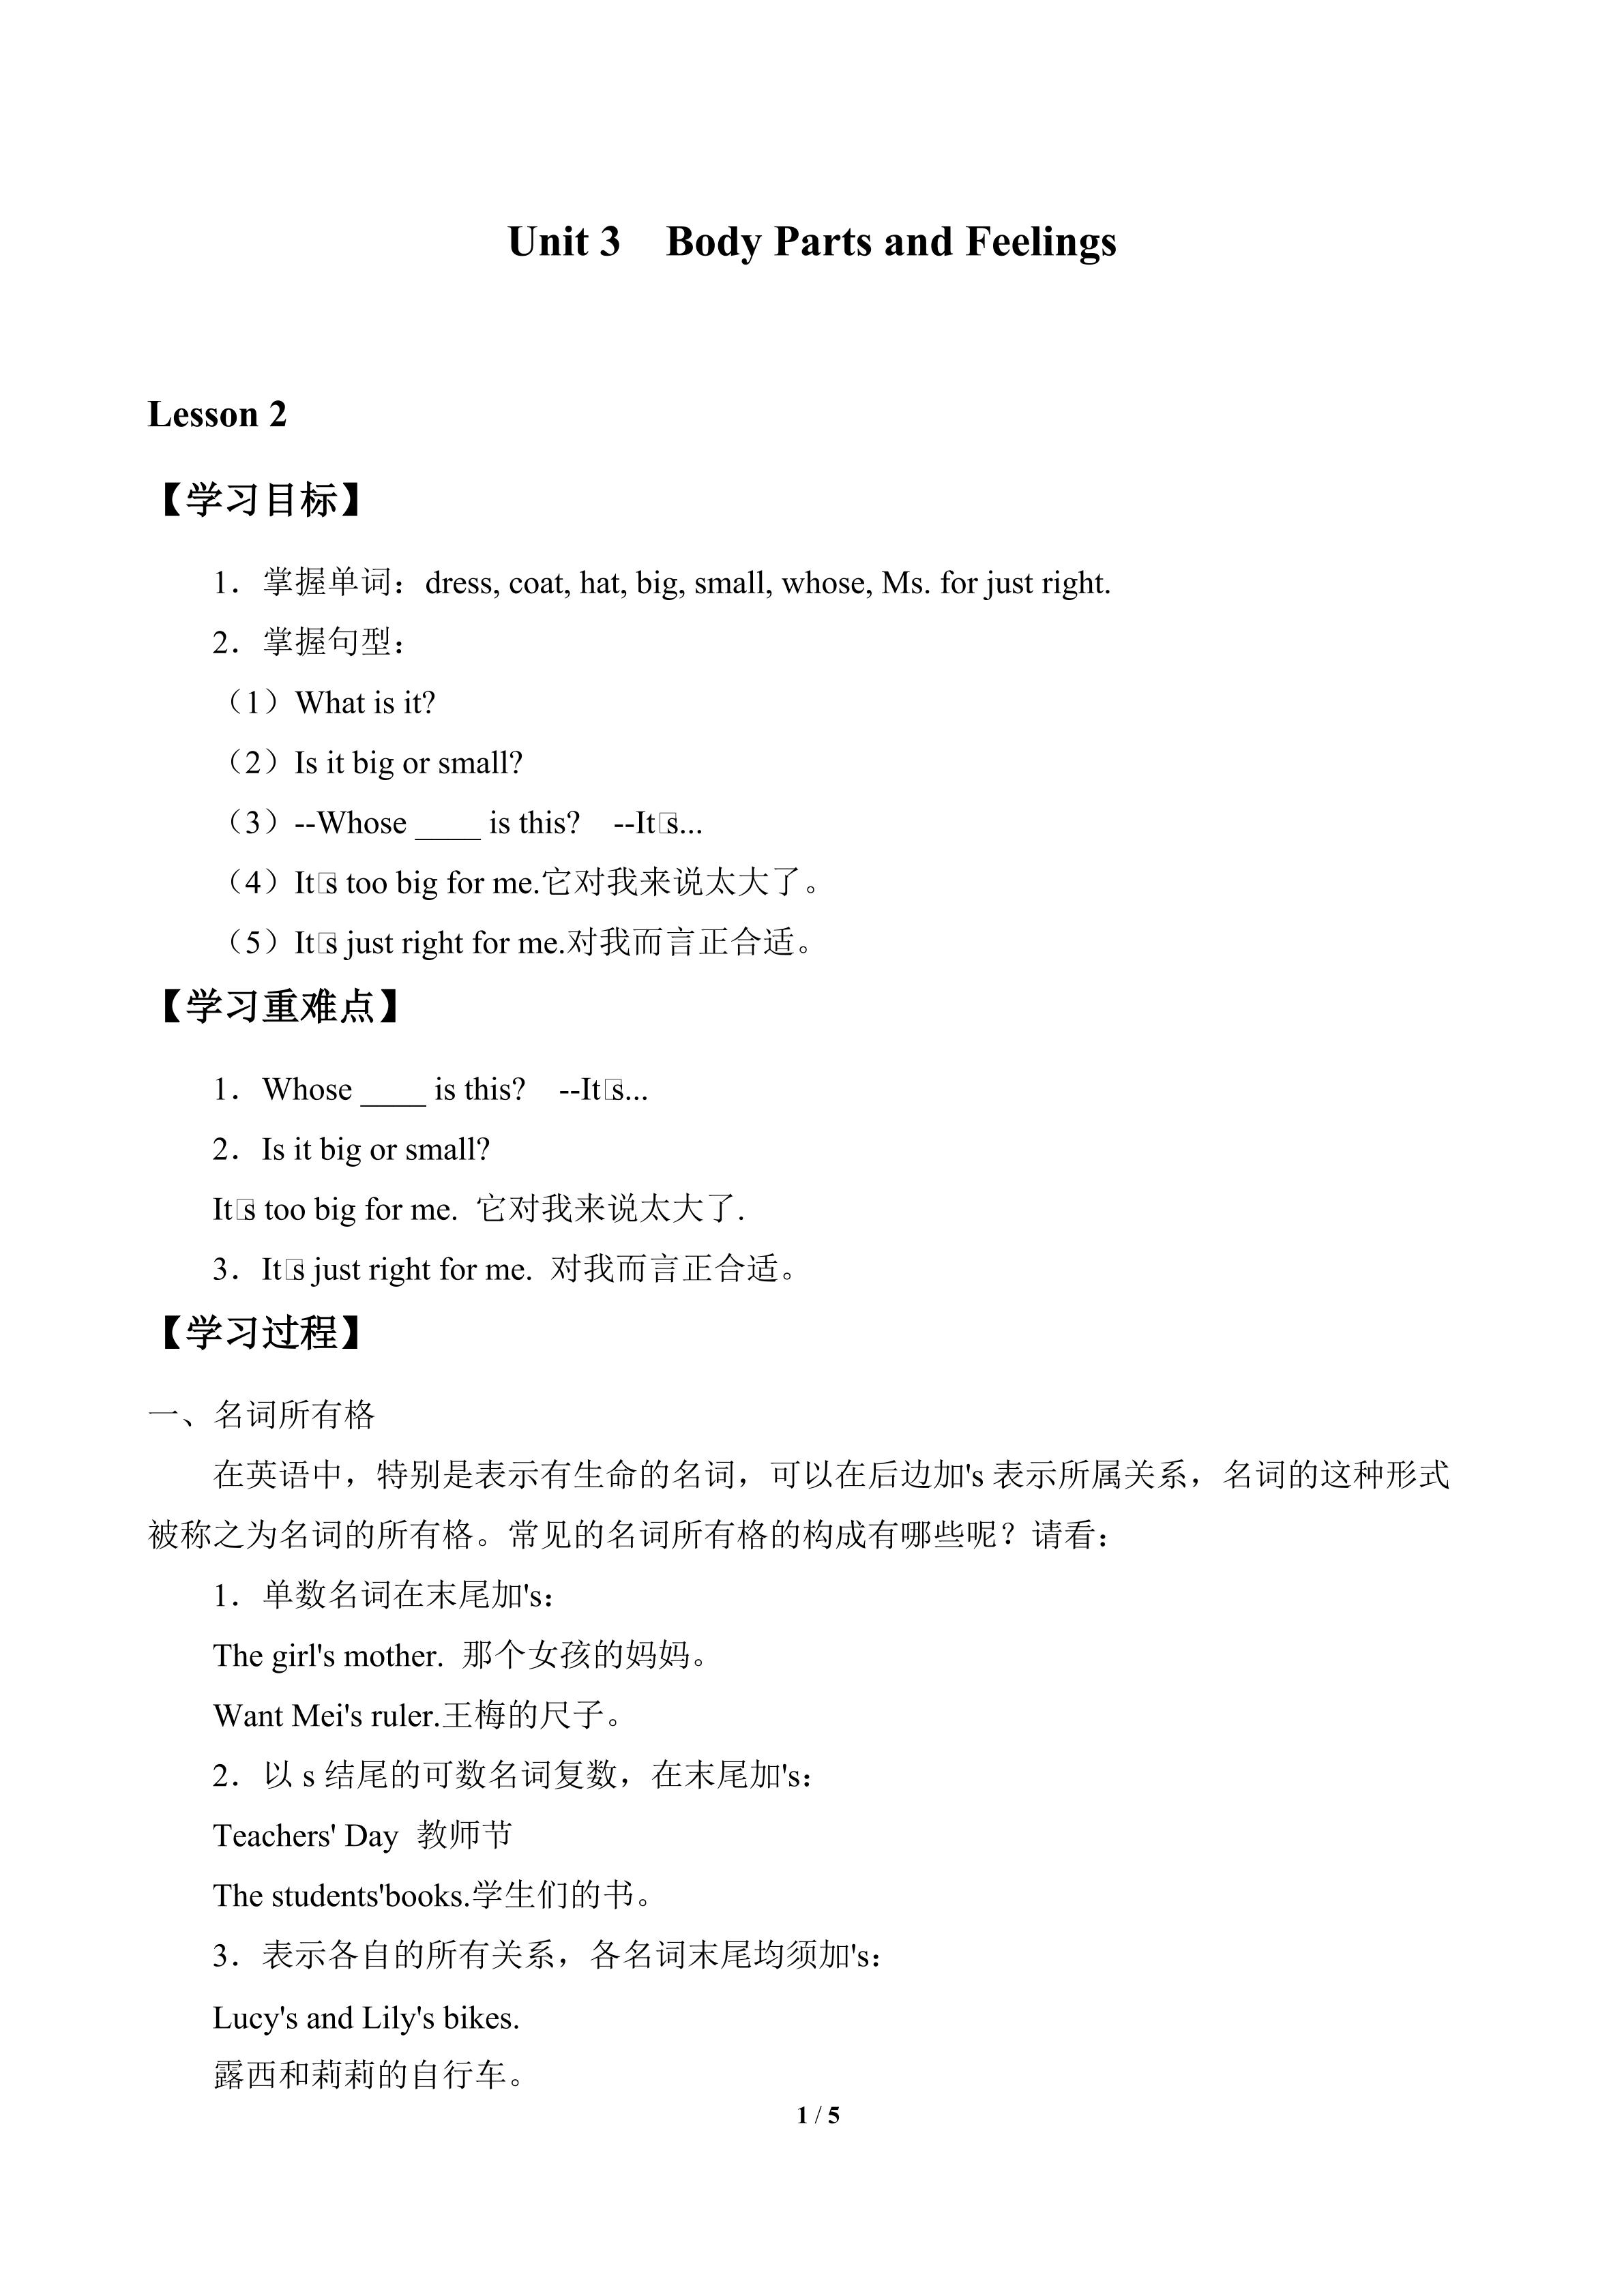 Unit 3  Body Parts and Feelings_学案2